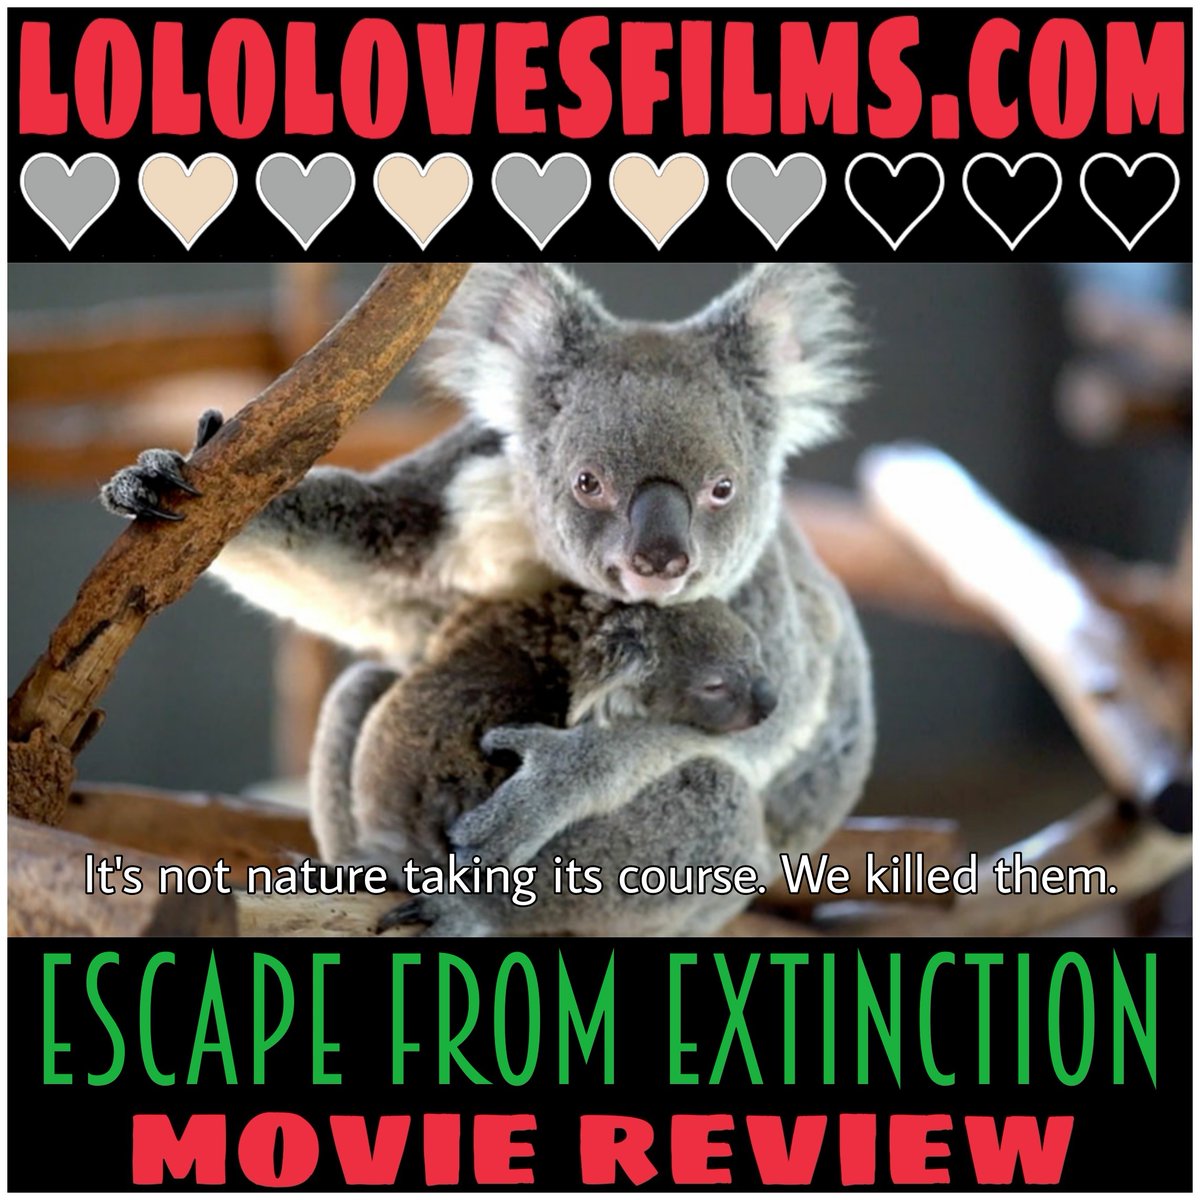 .@sdfilmfest #MOVIE #REVIEW: #EscapeFromExtinction (2020) is a competently made documentary that examines the importance of accredited zoos and aquariums in wildlife conservation. bit.ly/LoloESCAPEFROM…